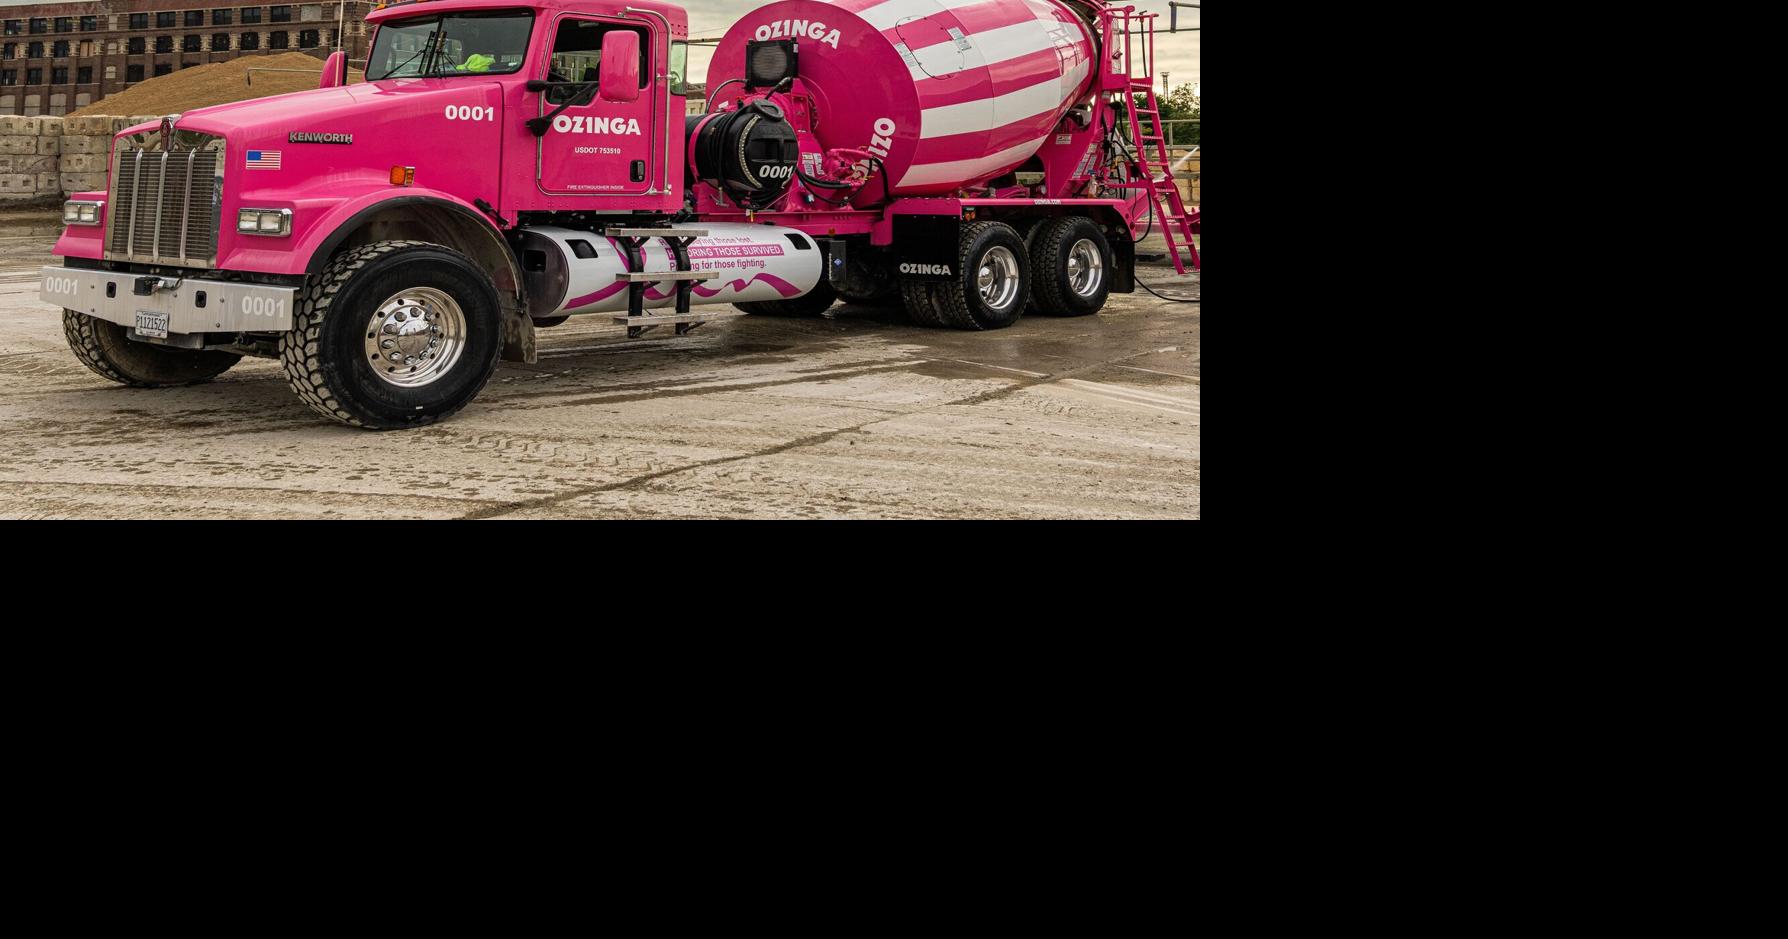 Ozinga rolls out pink ready-mix truck to support breast cancer charities